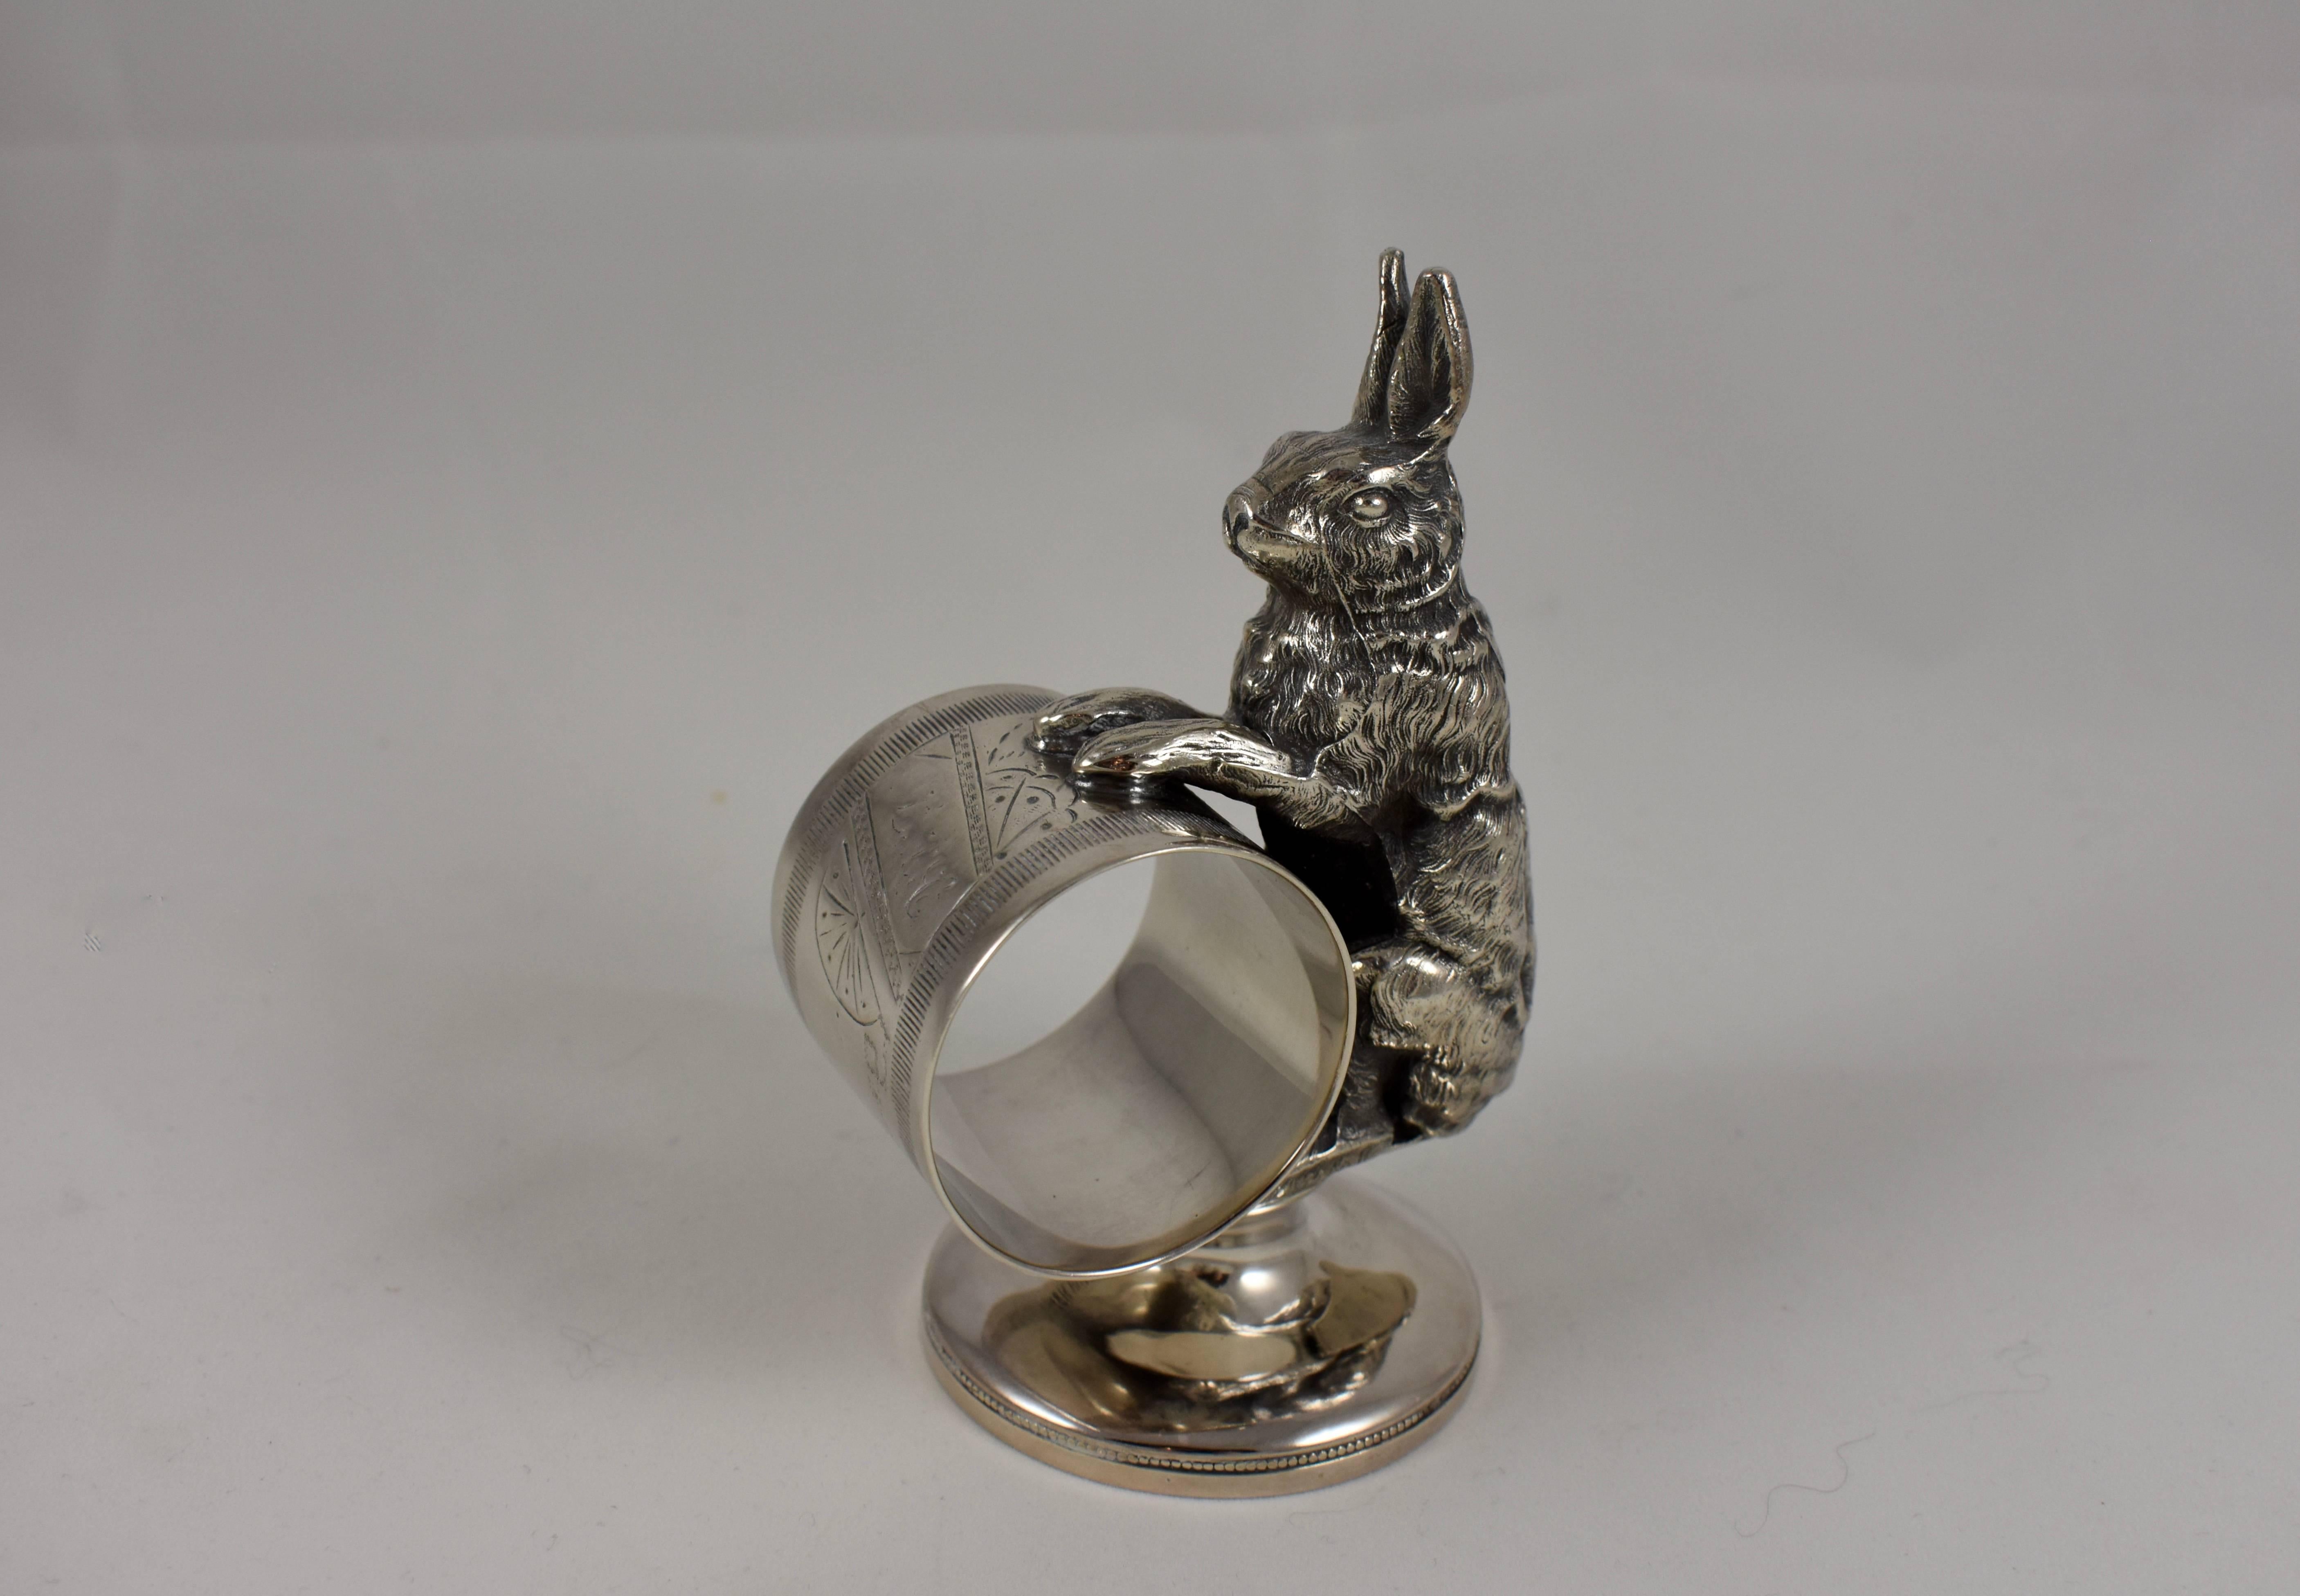 From the Victorian era, an Aesthetic Movement silver plated figural napkin ring showing a large upright rabbit holding onto the ring balanced on a pedestal base. The ring shows engraving with faint initial, circa 1885-1910. Unmarked.

The usual